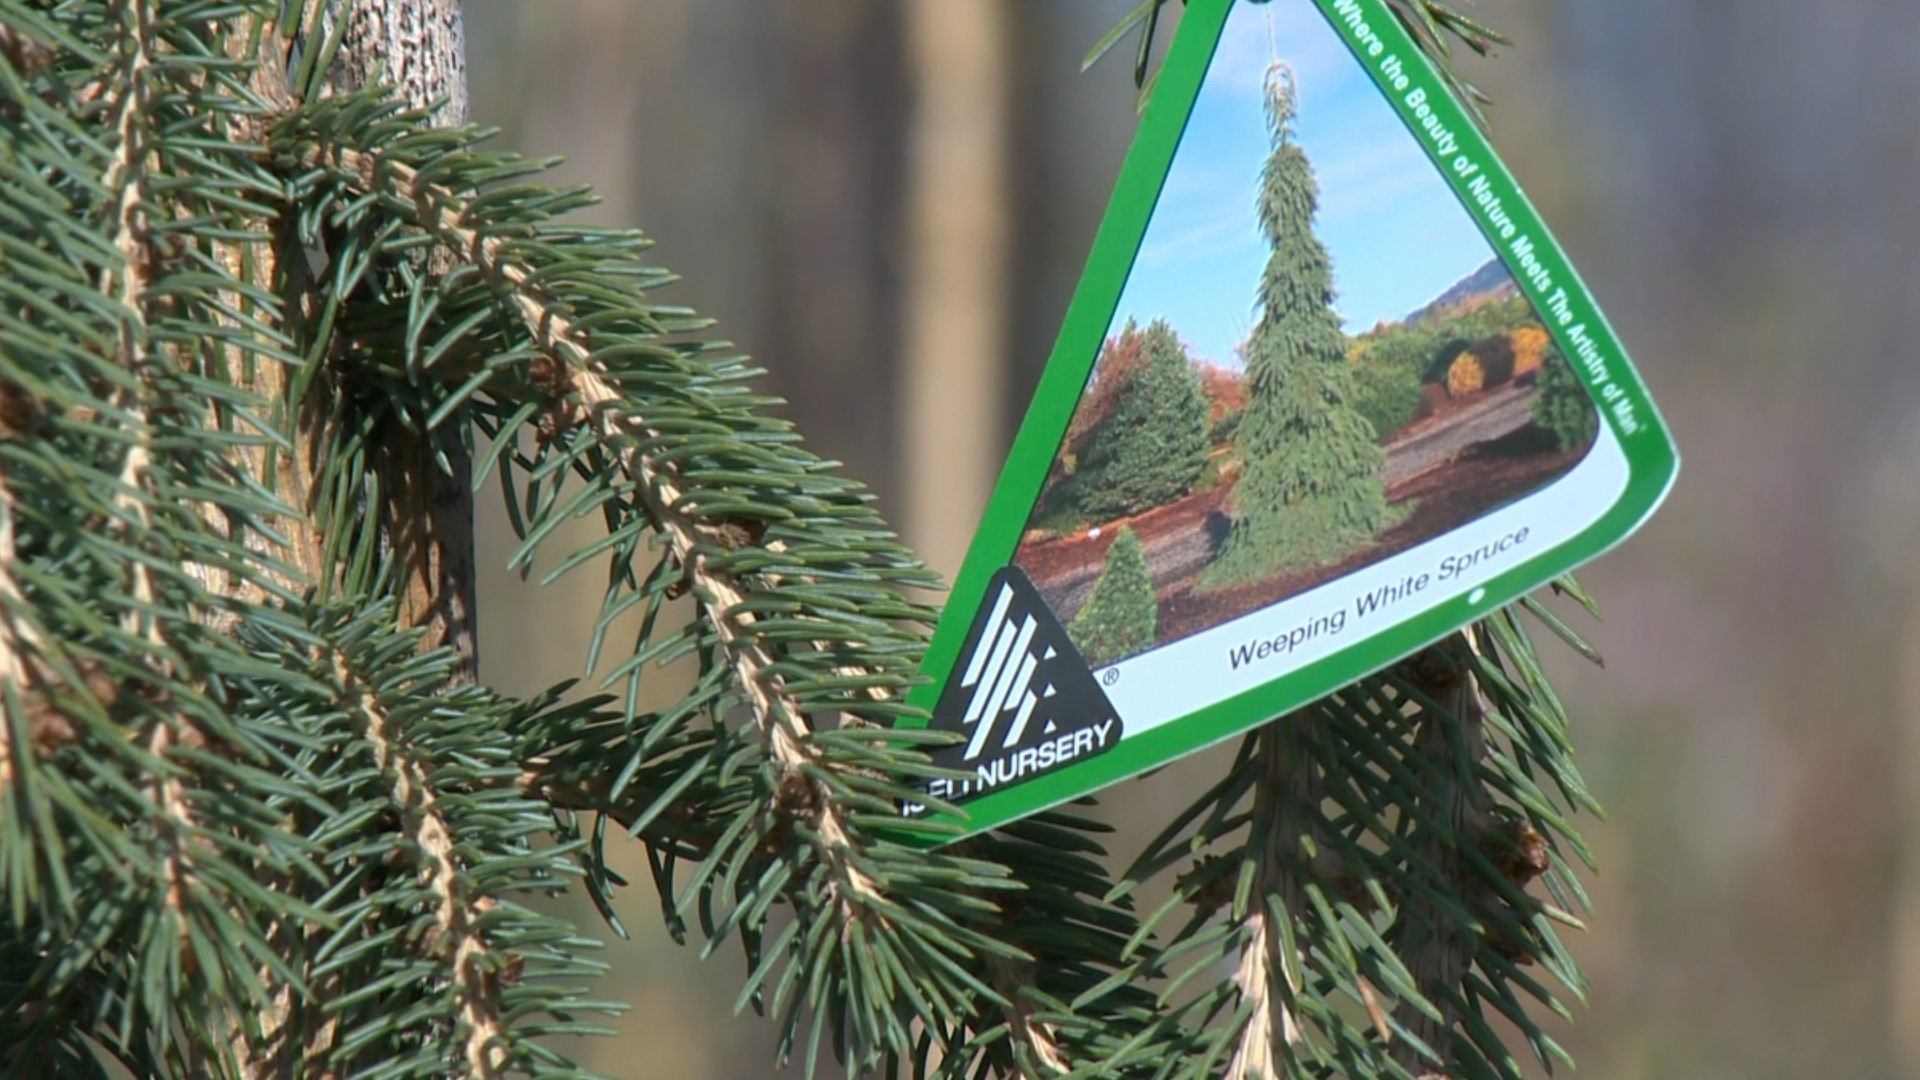 Whether you are in a new home, or ready to replace or redo your landscaping, this weekend is the perfect time to plant trees. KTVB has local options for Arbor Day.